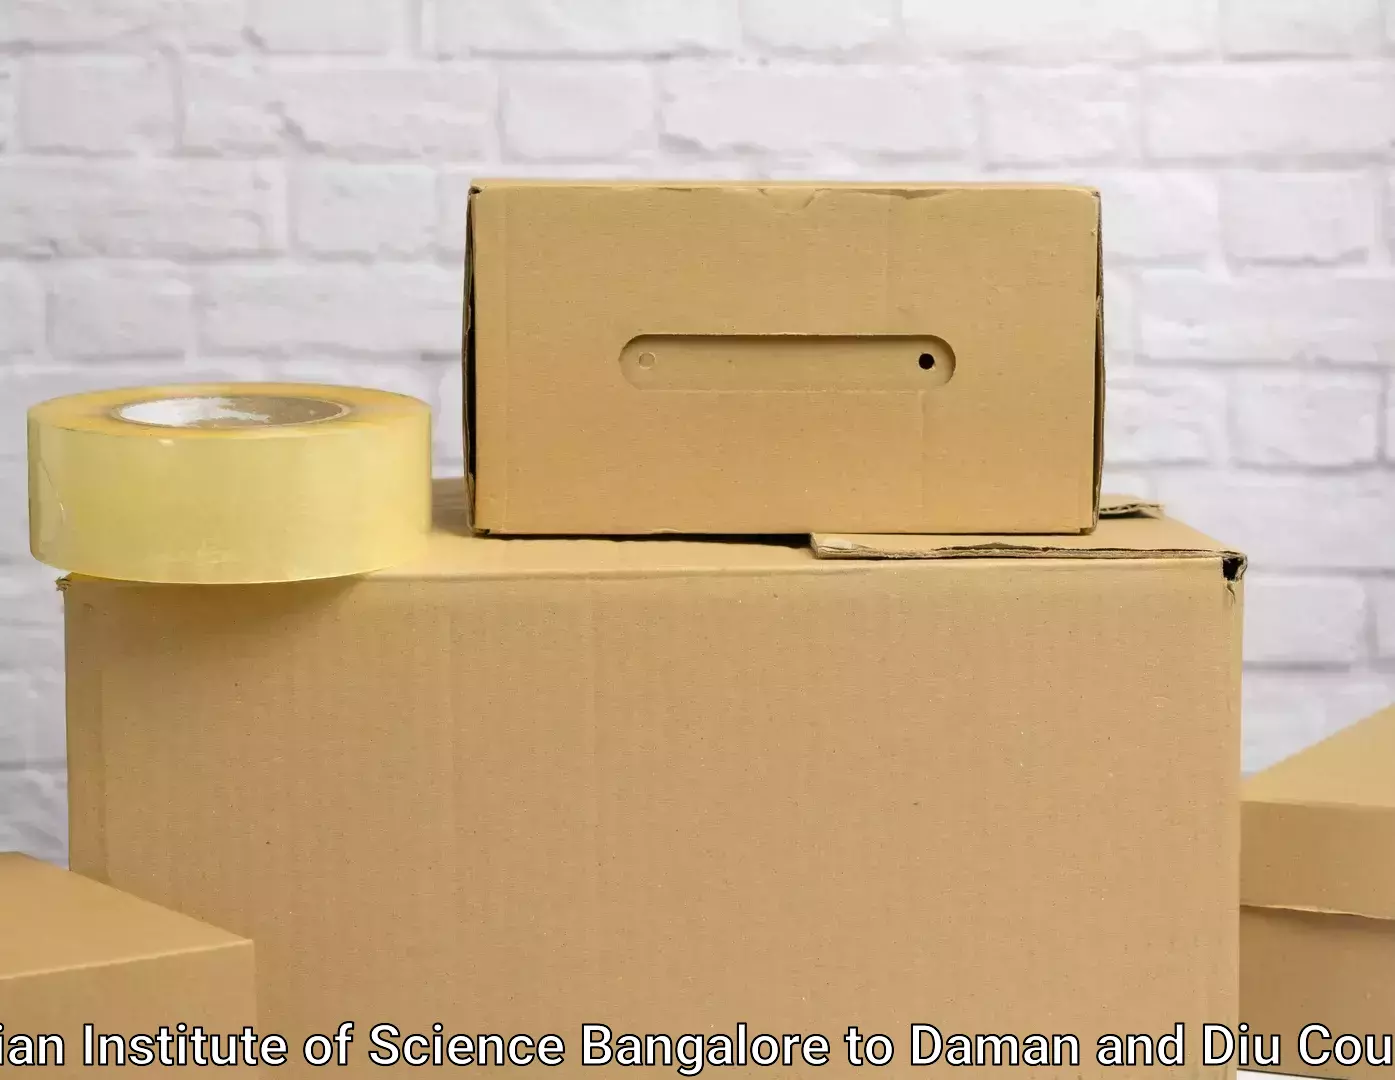 Furniture moving service Indian Institute of Science Bangalore to Daman and Diu